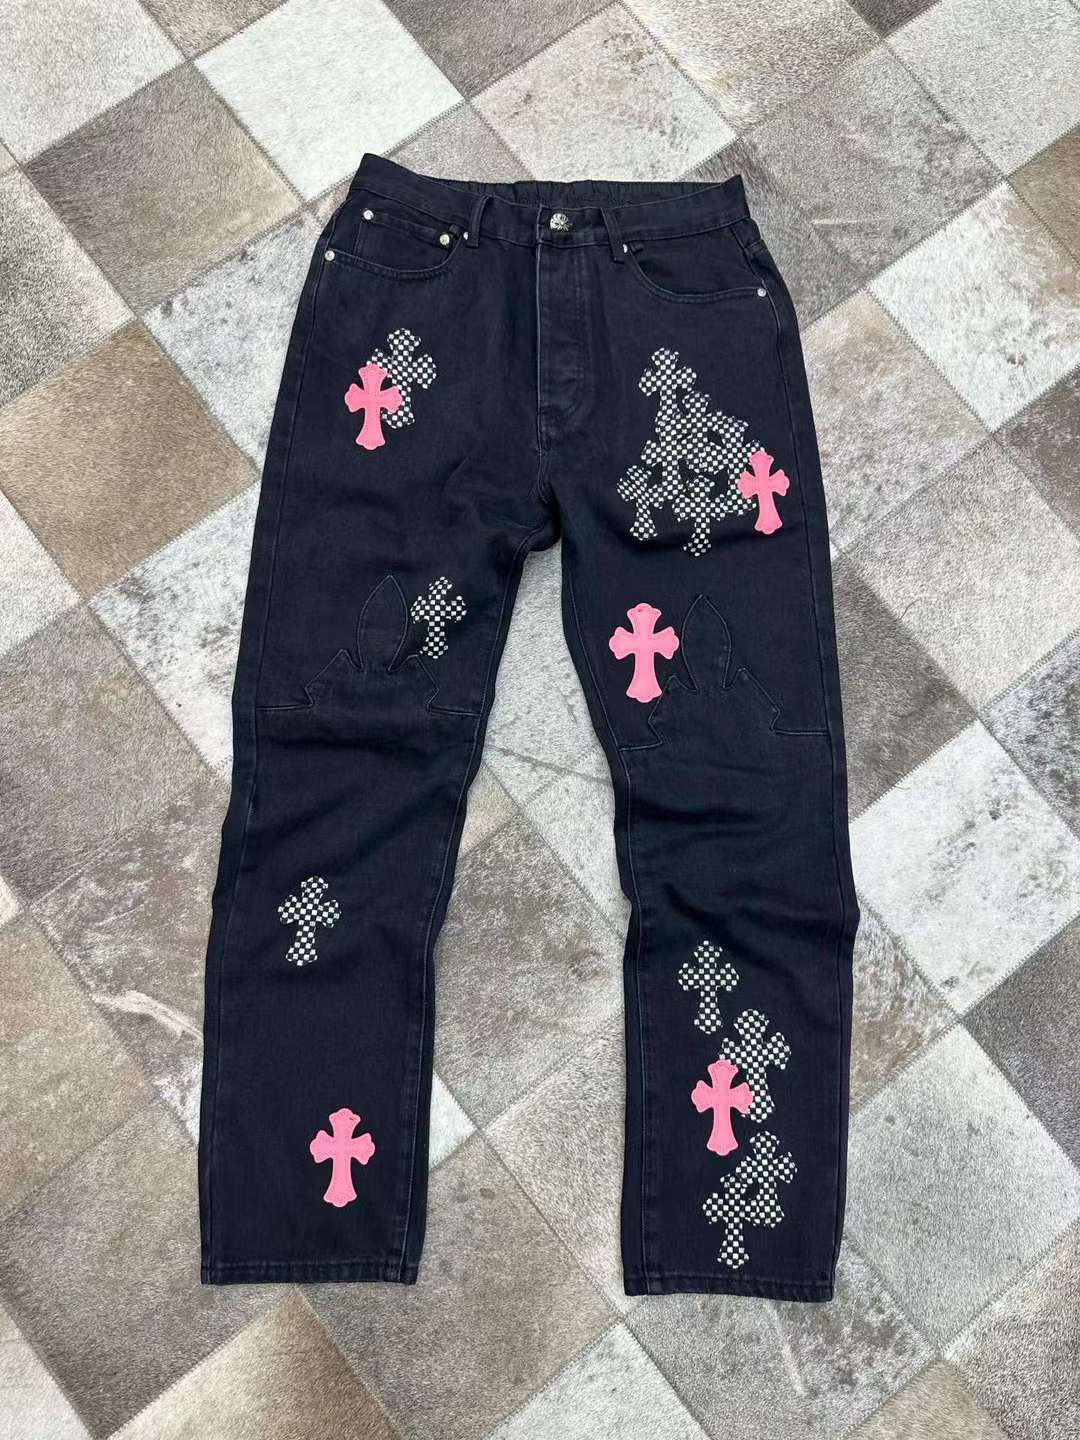 Chrome Hearts Pink & Checkered Cross Patch Fleurknee Jeans Black for Sale  in Irvine, CA - OfferUp